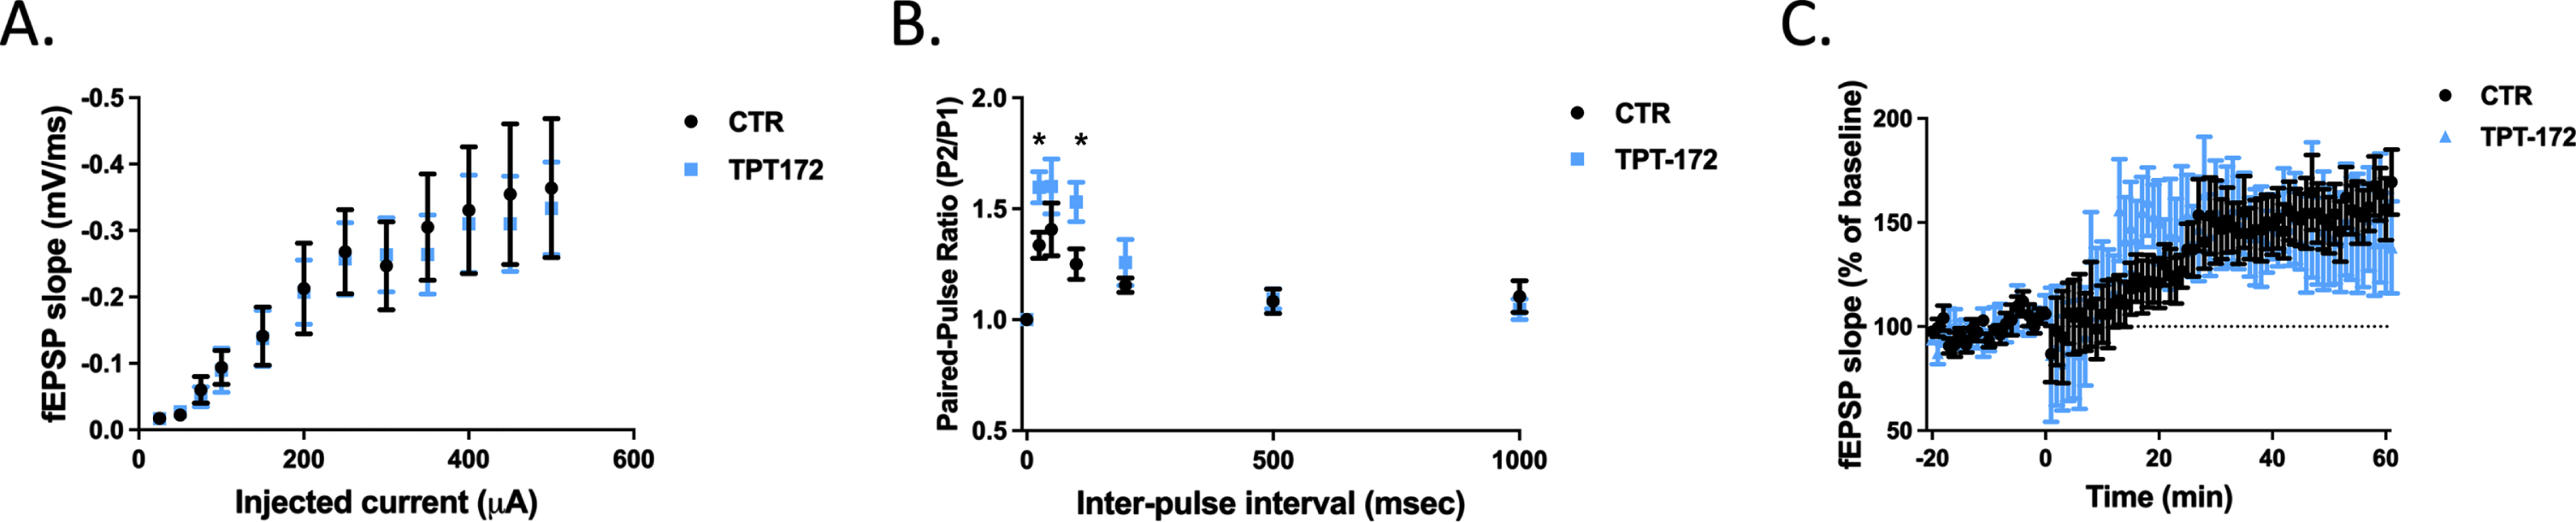 Acute TPT-172 administration improves synaptic plasticity. A) The input-output curve of the fEPSP slope versus the injected current. B) Time dependence of paired-pulse facilitation of the fEPSP slope, presented as a ratio of the fEPSP slope at pulse 1 to the fEPSP slope at pulse 2, for different time-points. C) LTP induced with 3 consecutive 1-s high-frequency stimulation pulses of 100 Hz at a 20-s inter-pulse interval. The values of the fEPSP slope are presented as the percentage of response after induction of LTP to the averaged baseline response. Ts65dn hippocampal slices incubated for 2 h in vehicle [(n = 7 CTR), or TPT-172 (n = 7 TPT)]. Values represent mean±standard error of the mean, *p < 0.05.